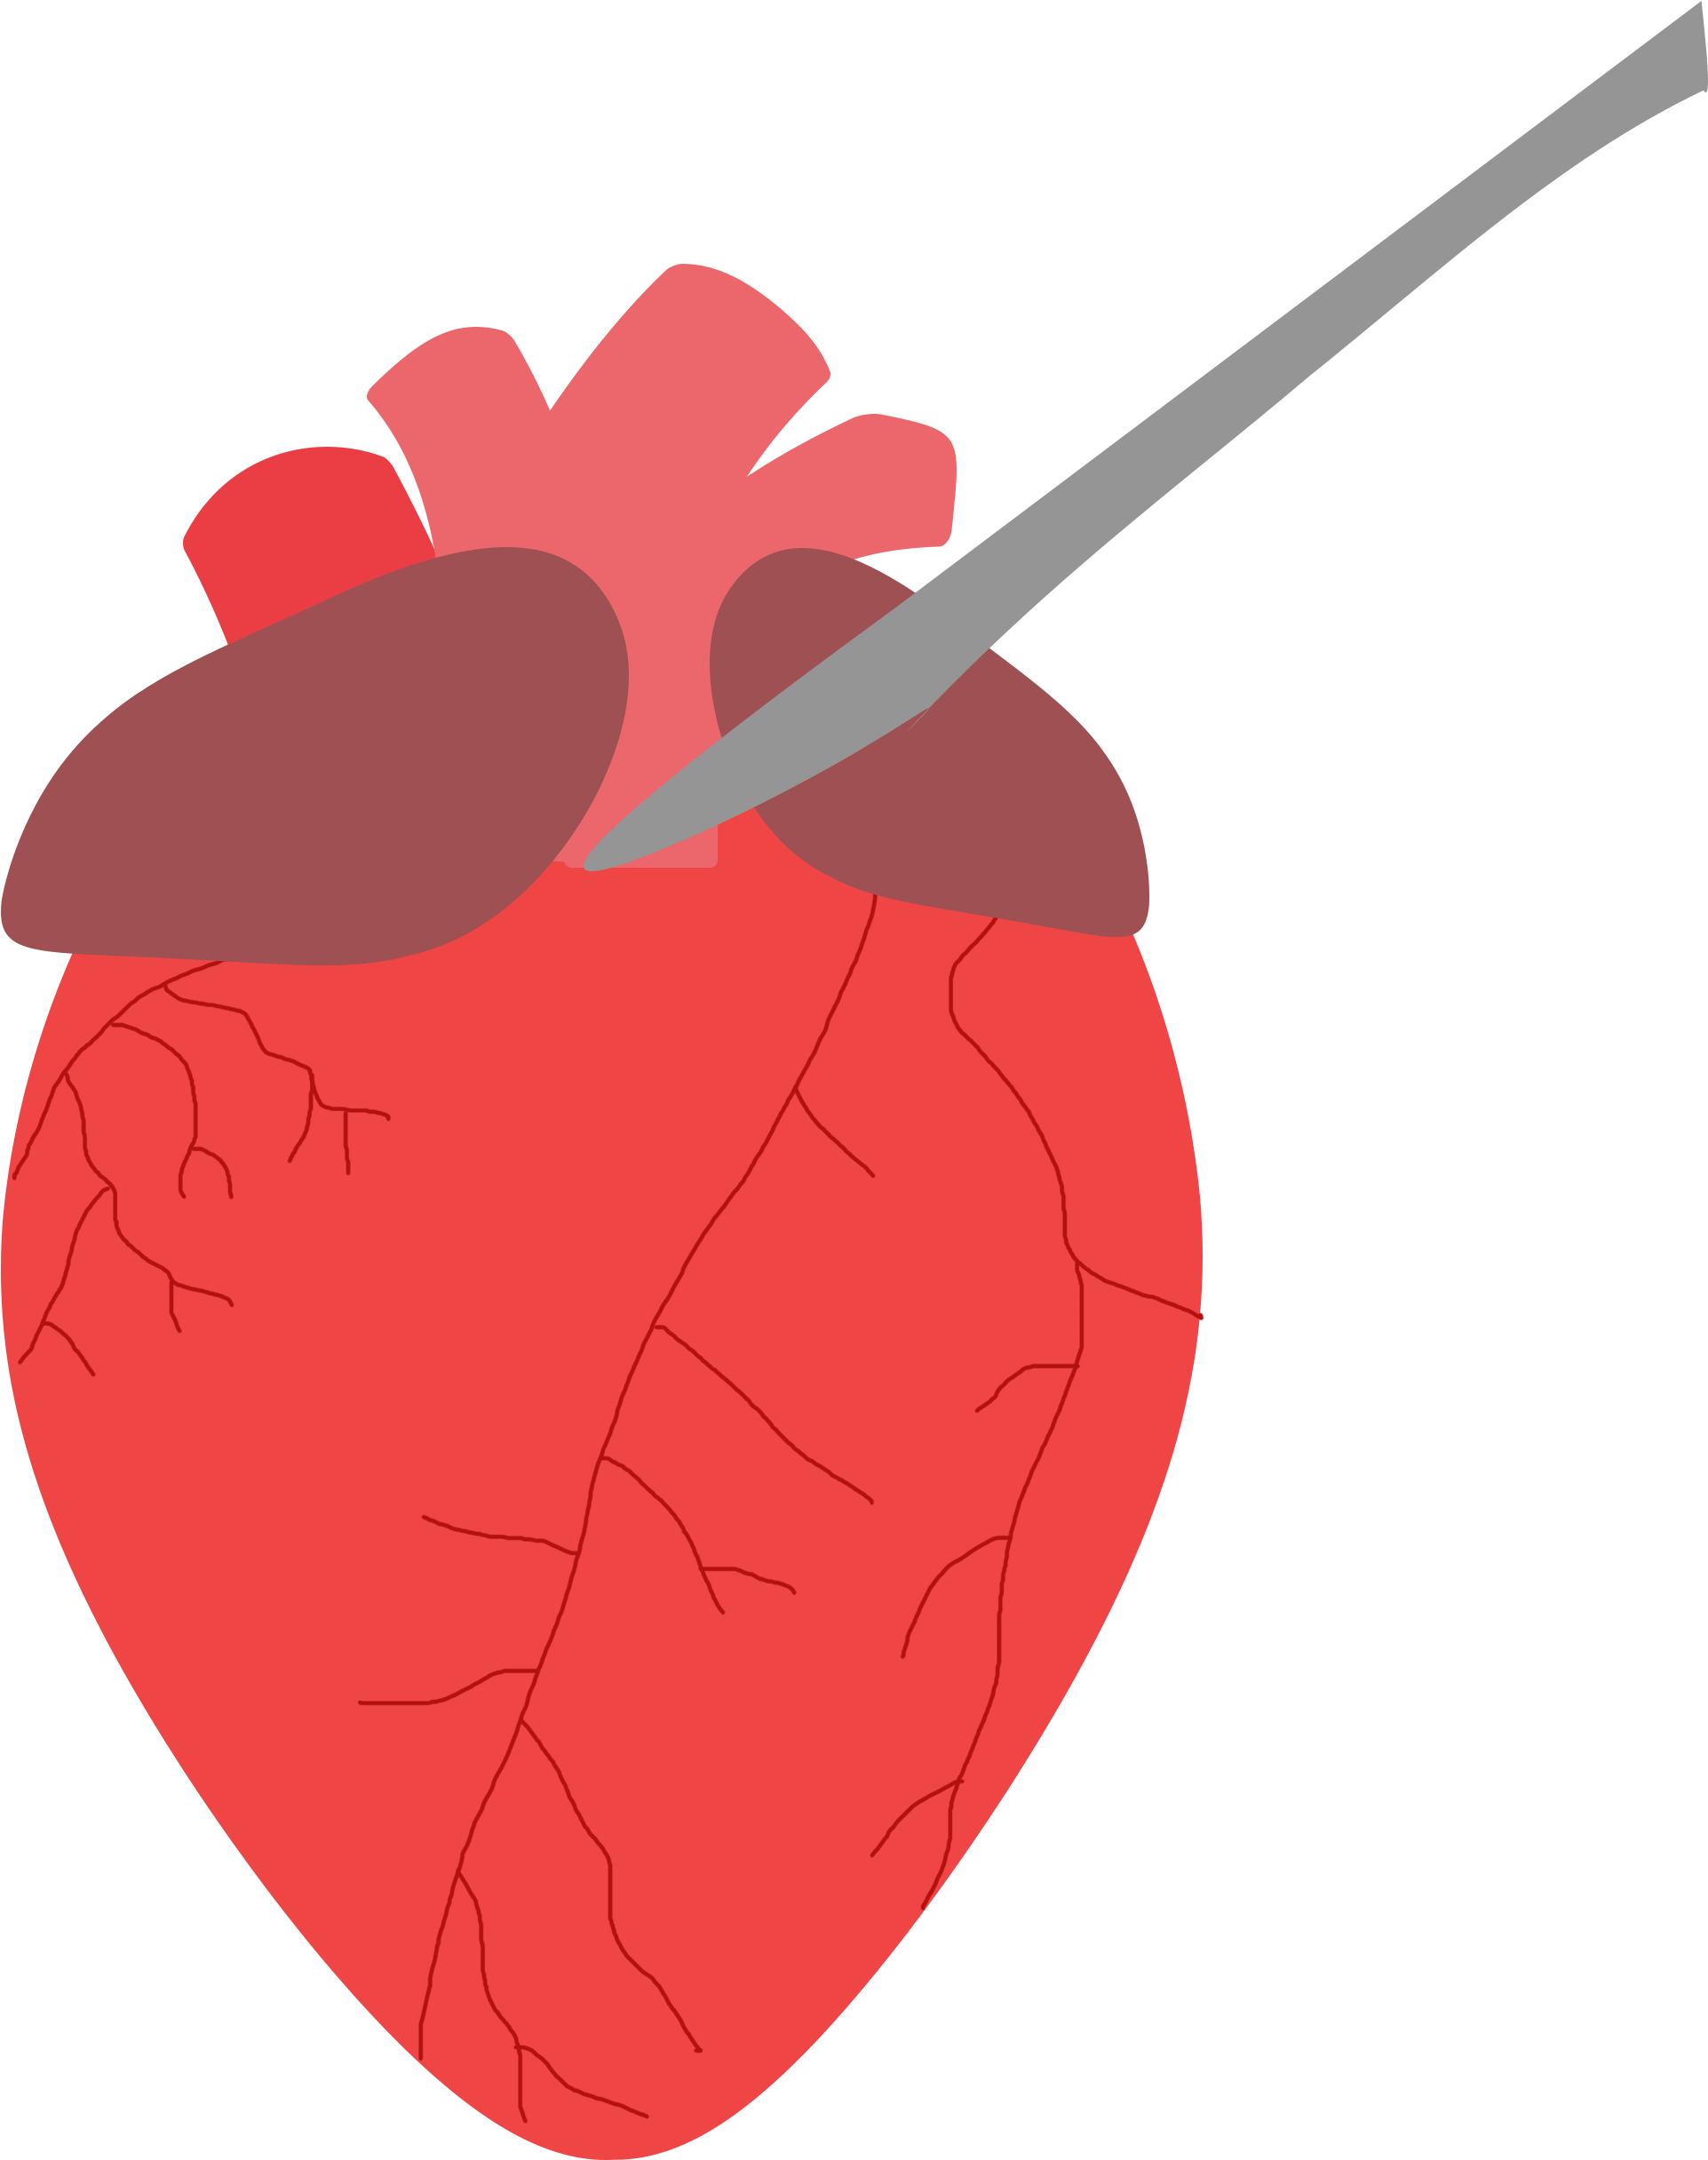 Place The Heart So The Anterior Side Is Facing Up - Gif (3000x3000)